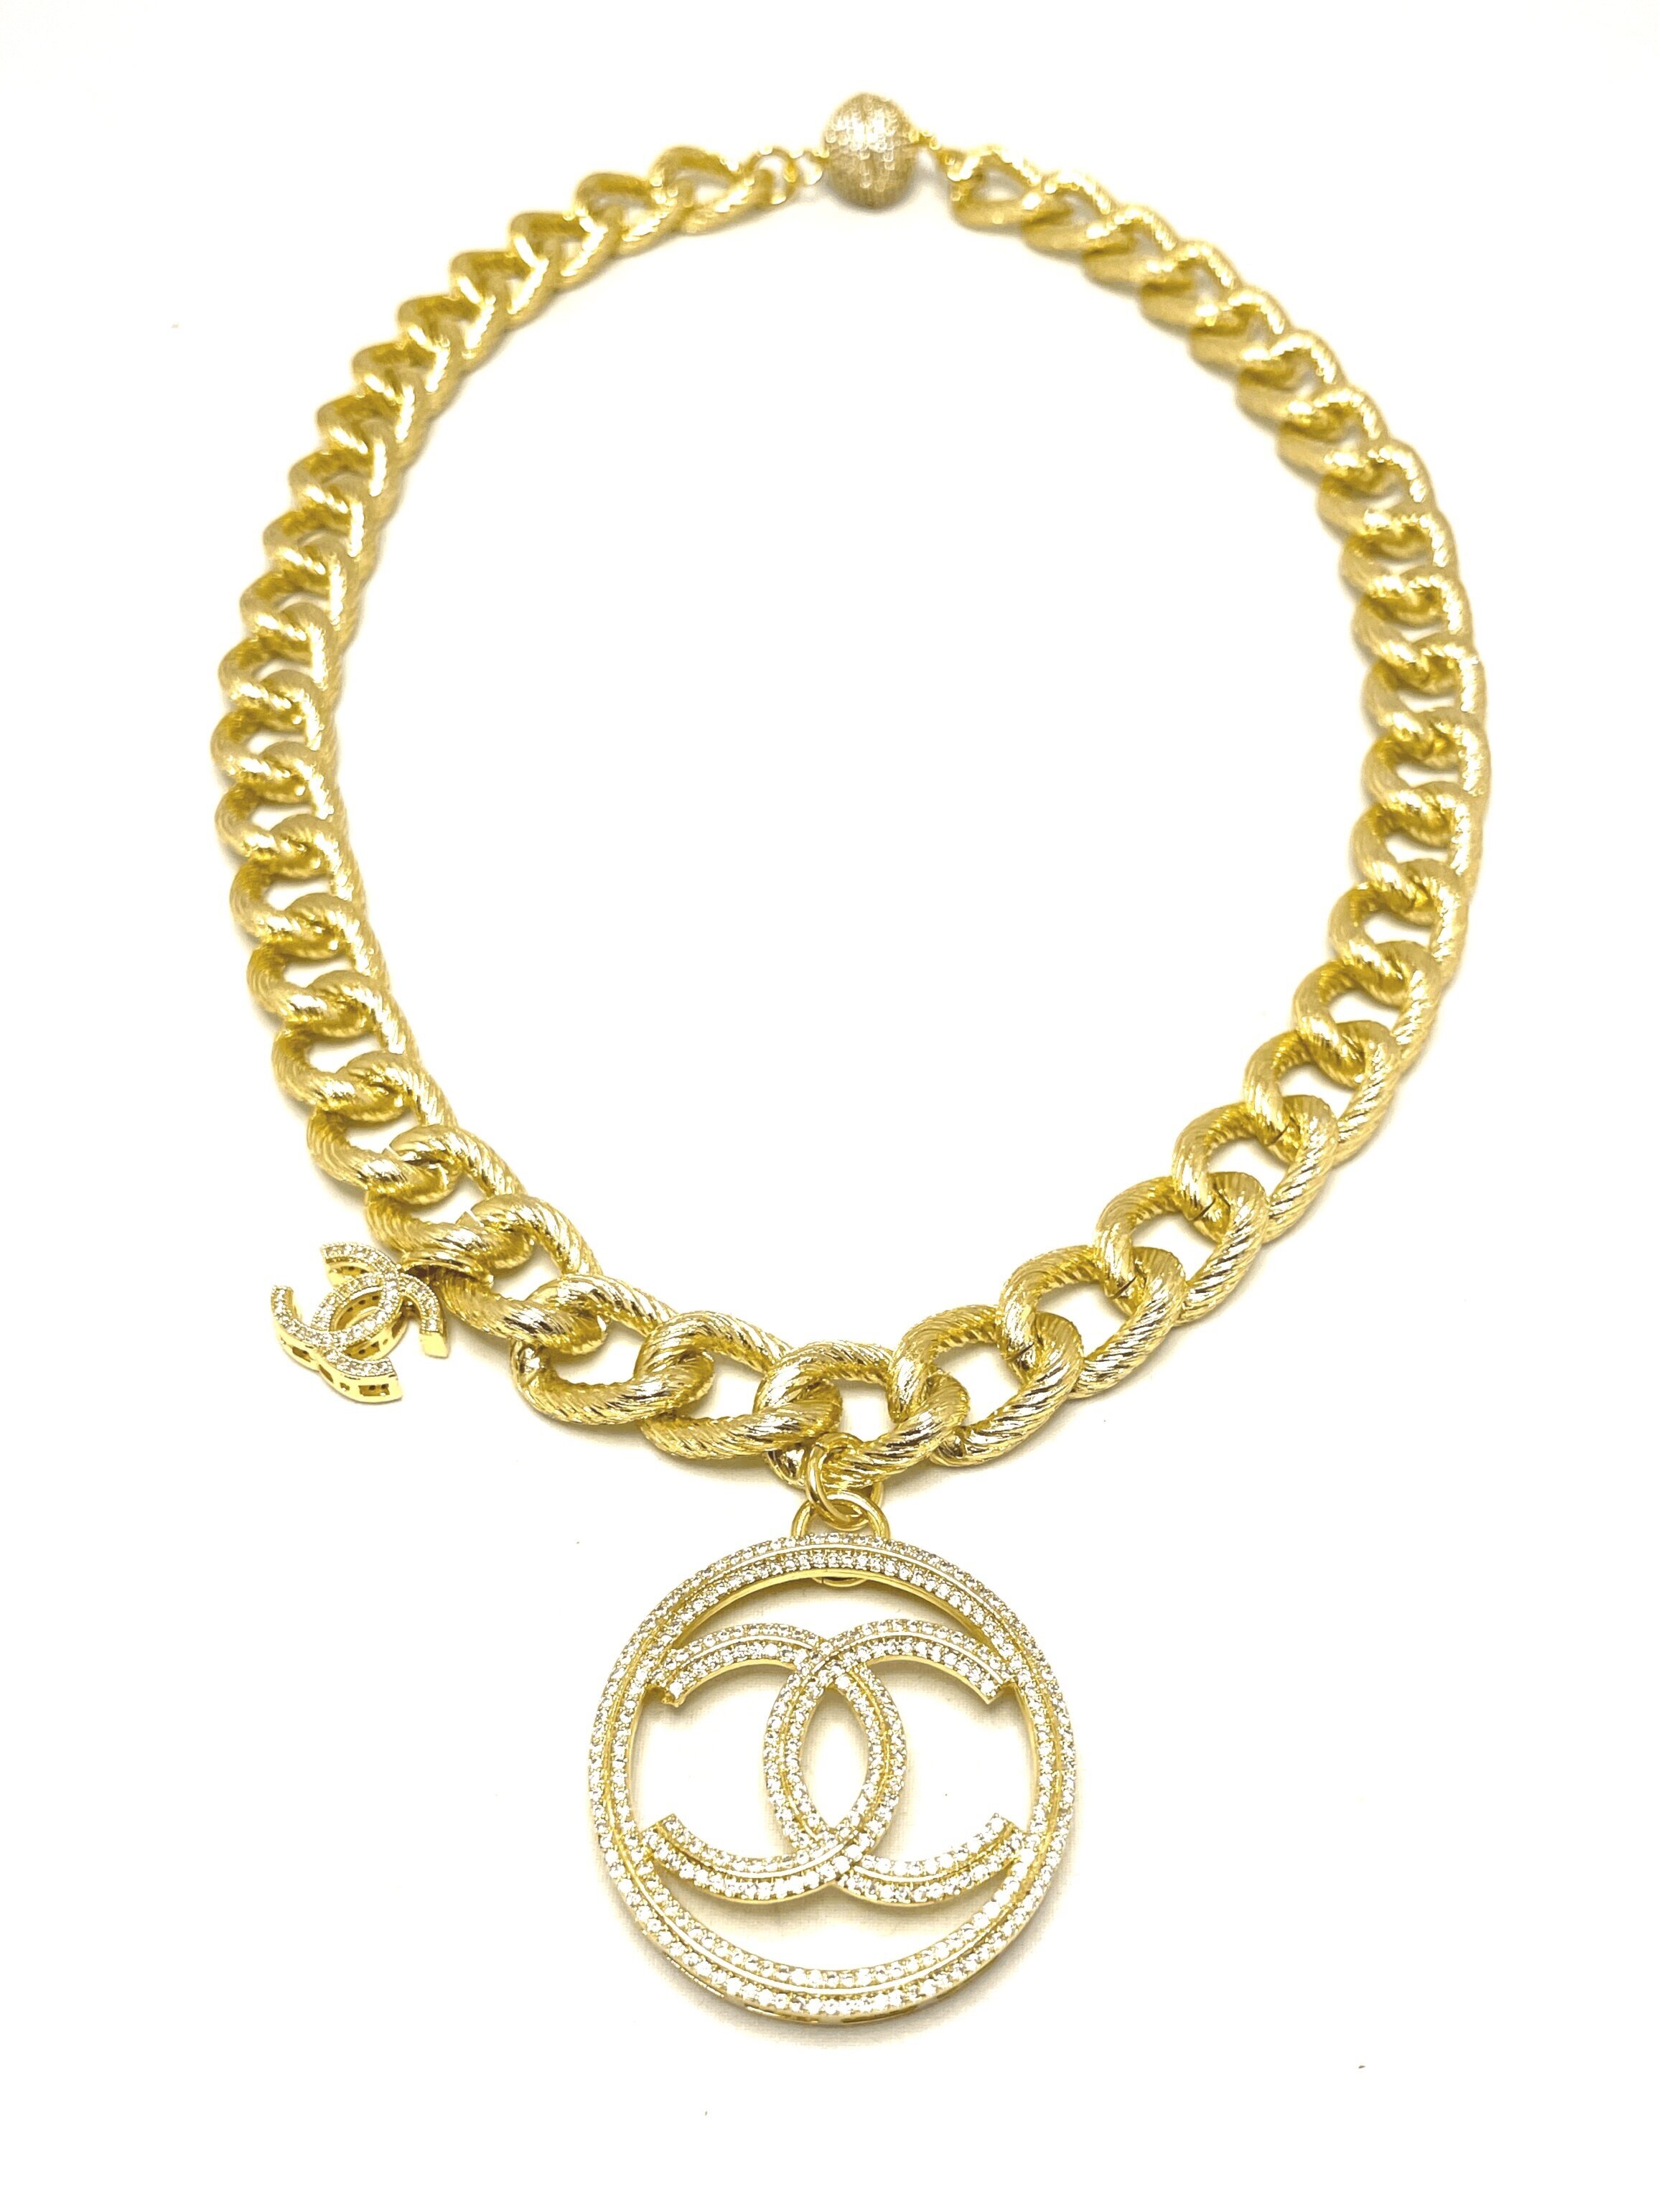 CHANEL PreOwned 1997 CC Turnlock Chain Necklace  Farfetch